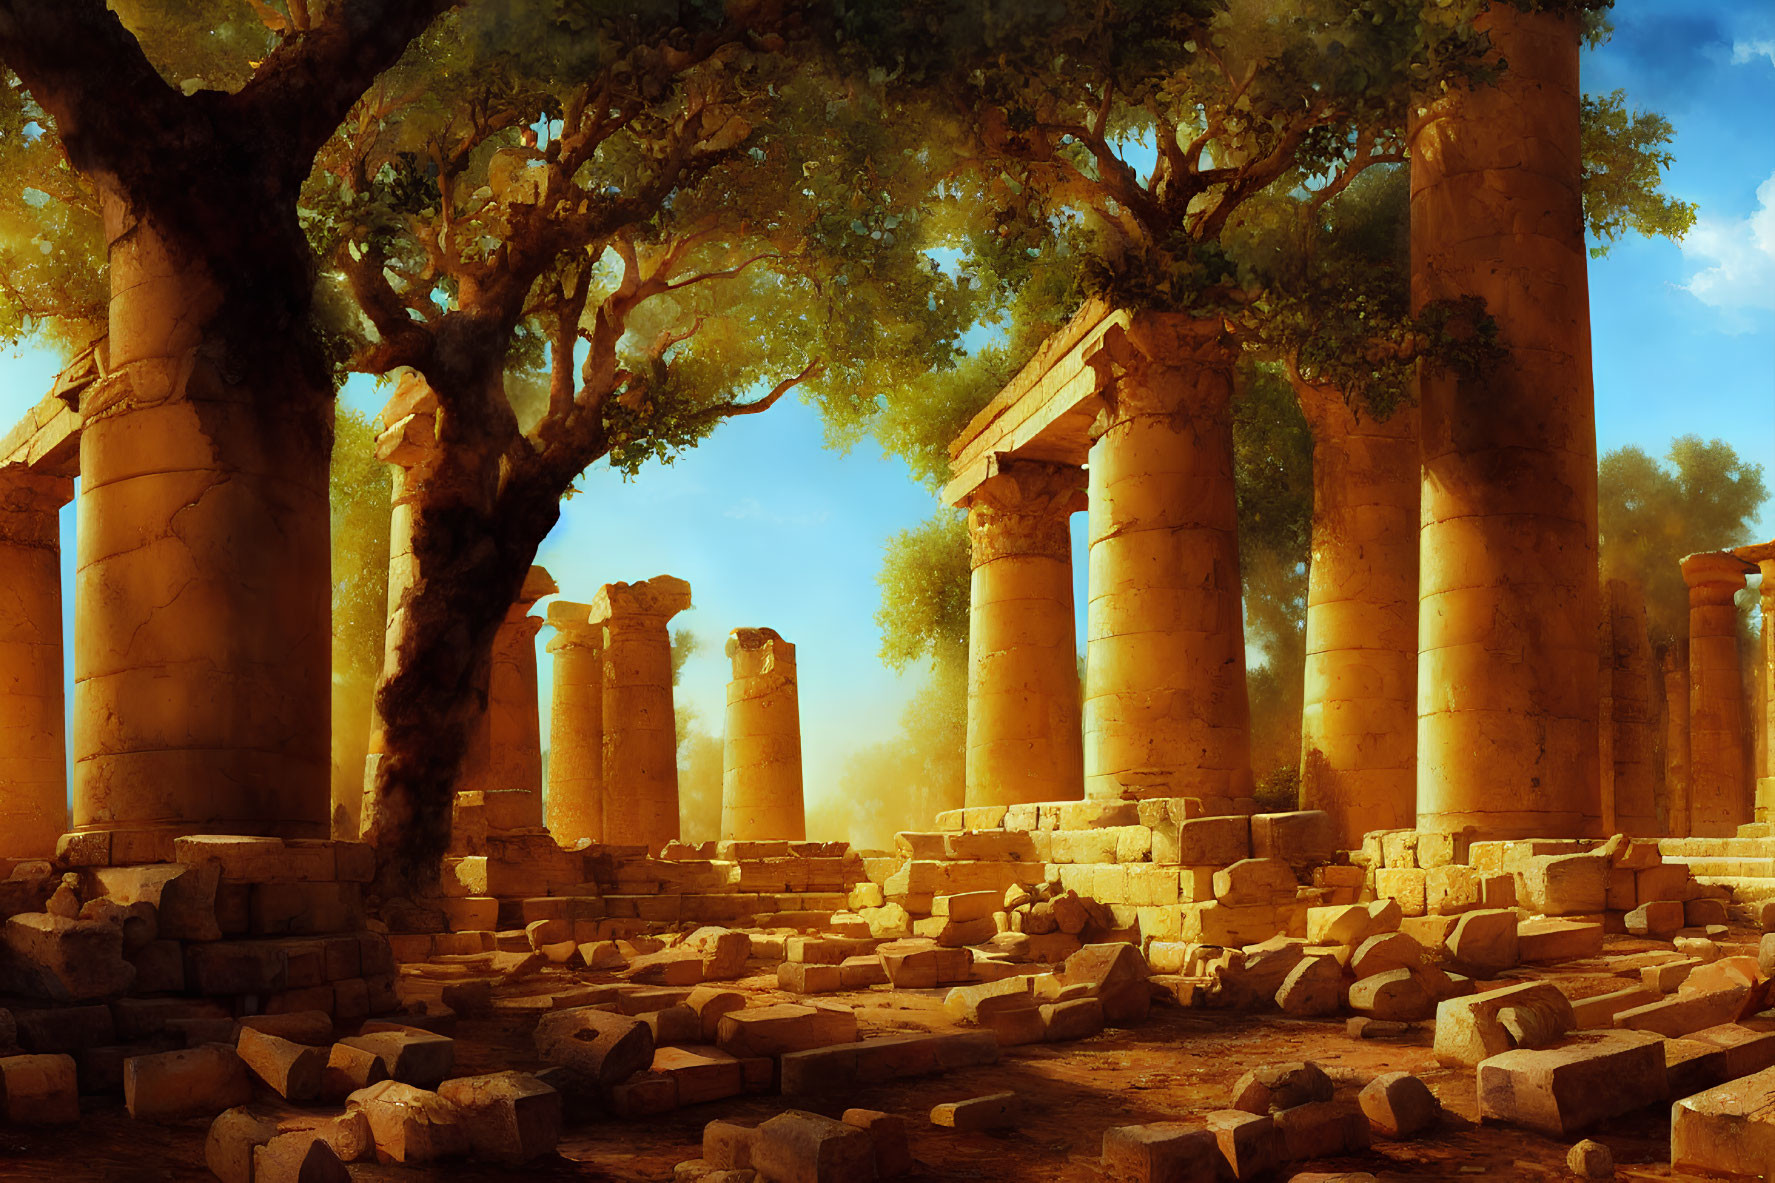 Ancient temple ruins with towering columns under a tree and sunlight filtering through foliage